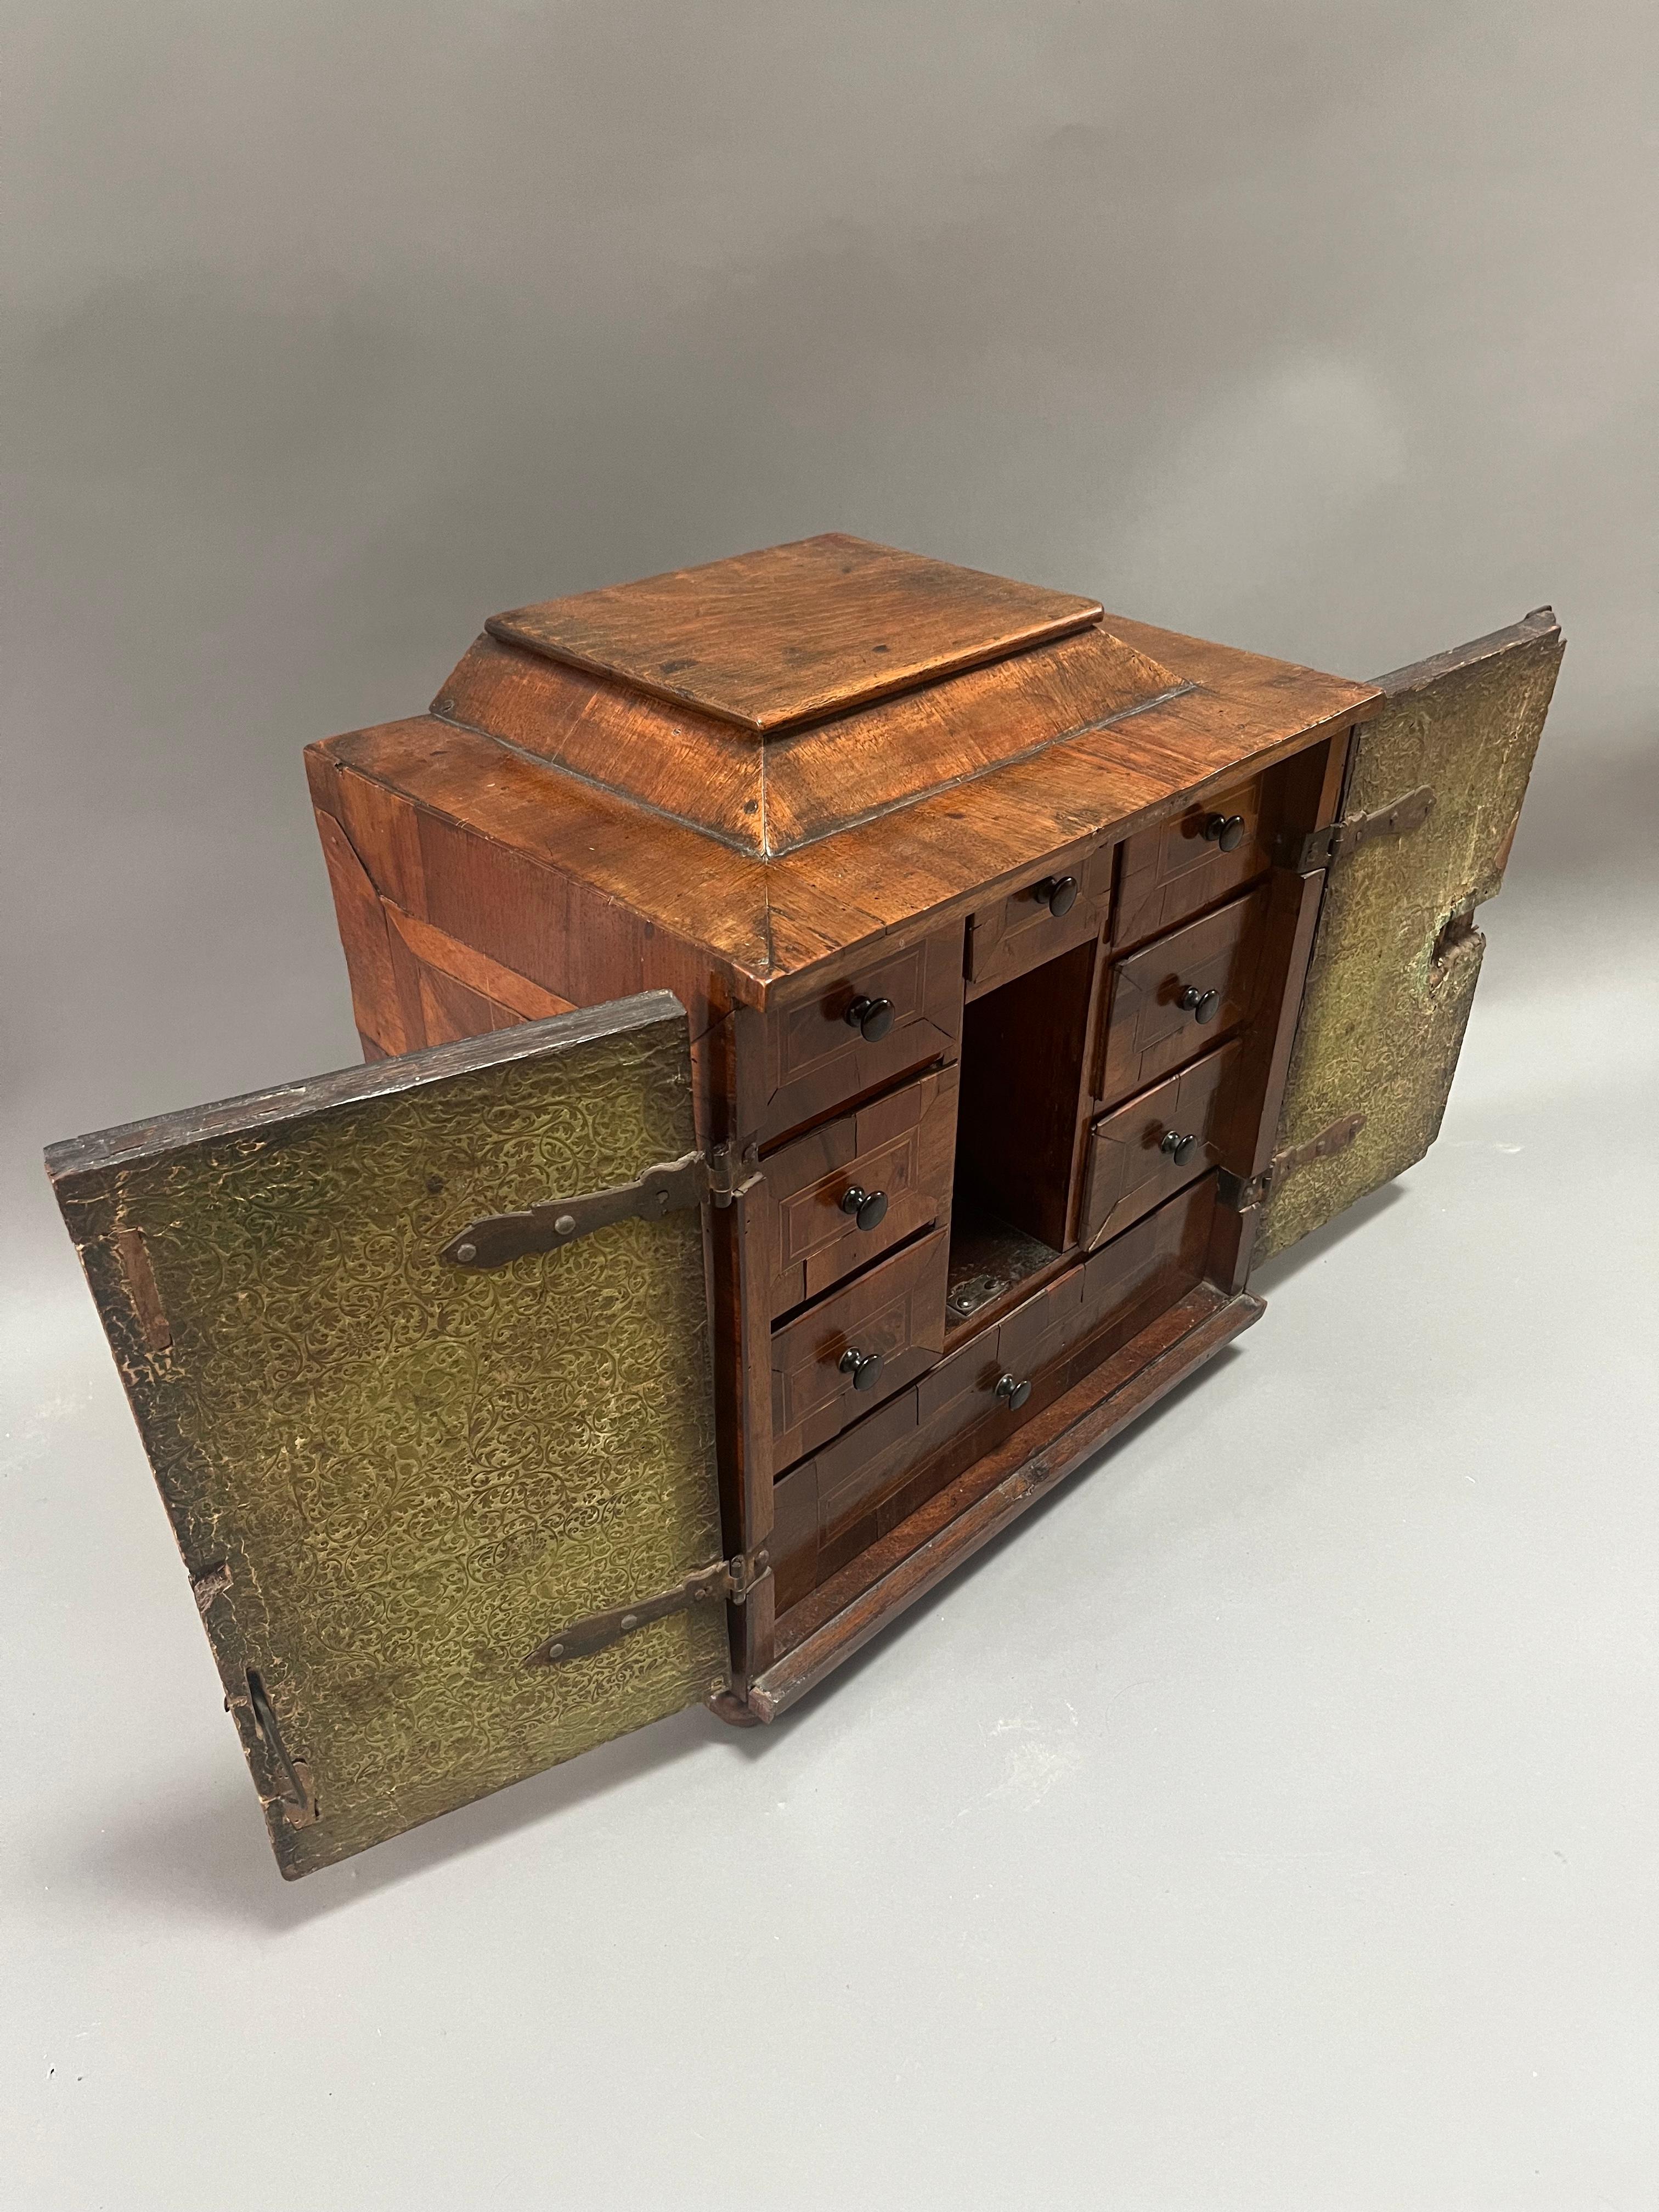 Made Of richly patinated Walnut with a lustrous deep color. Intricate Parquetry decorated sides and two doors. Original strap hinges conceal eight cross banded drawers and three further smaller drawers standing on four small bun feet. Southern